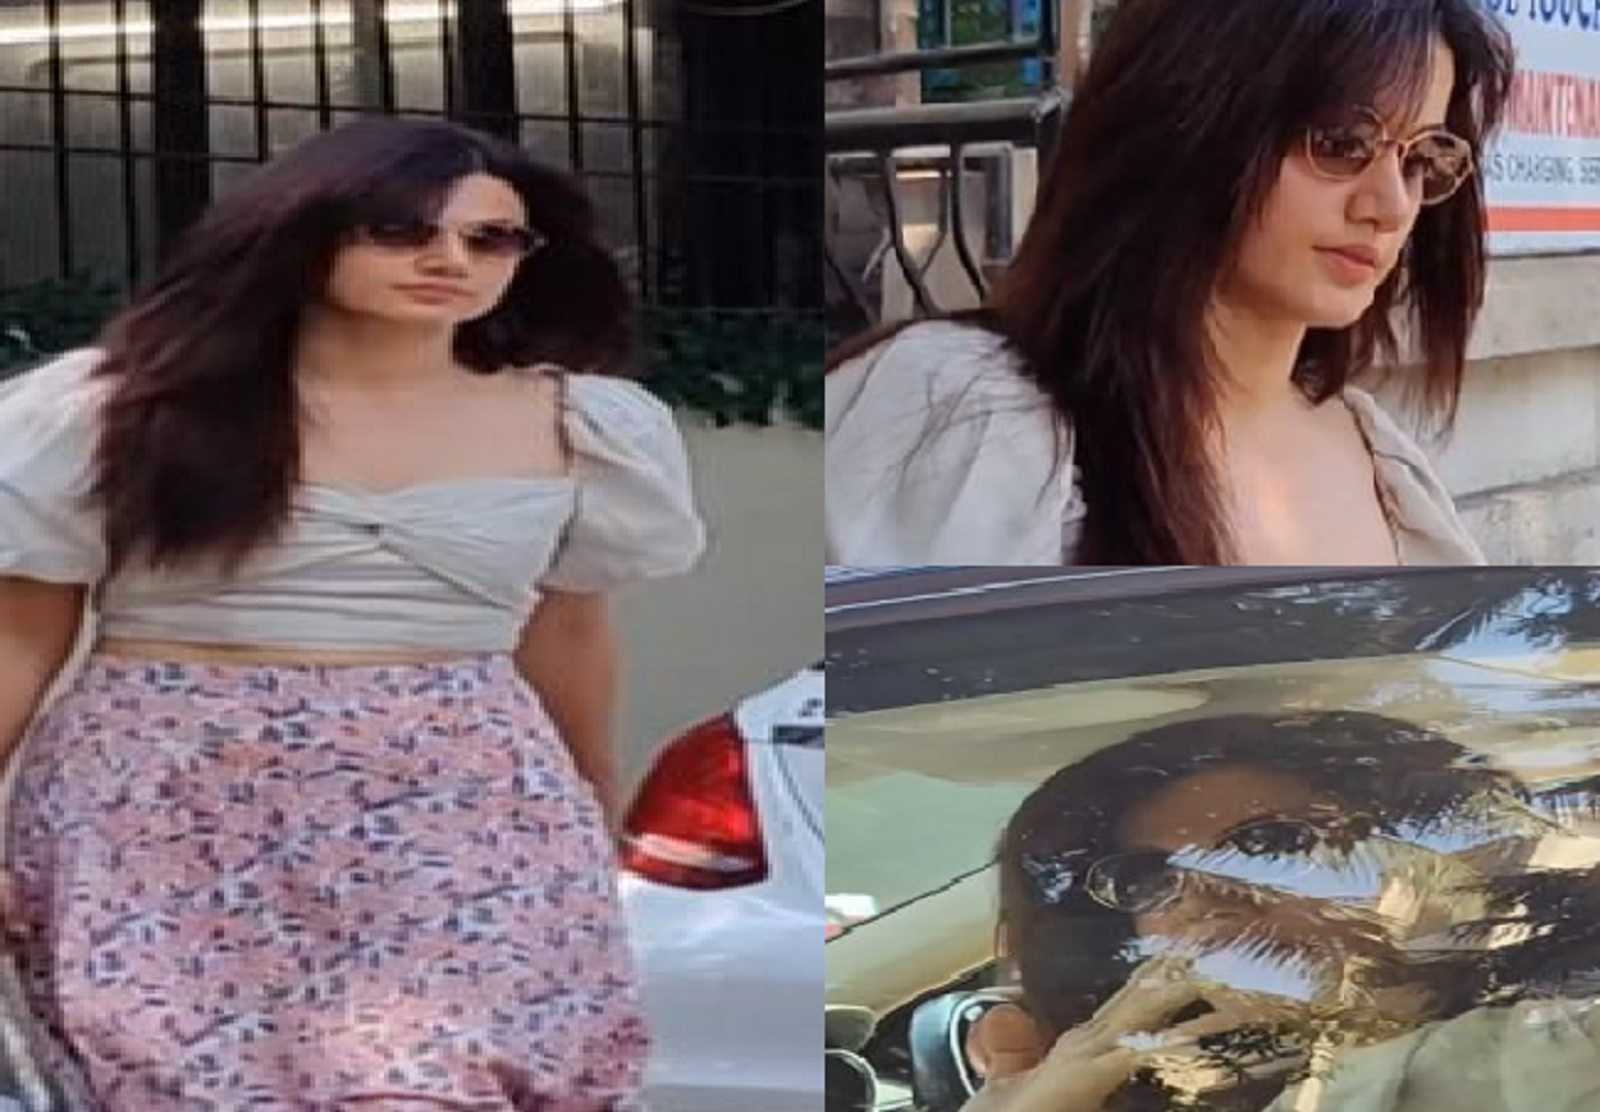 Blurr star Taapsee Pannu ignores paparazzi, reacts weirdly to a photographer's request; Watch